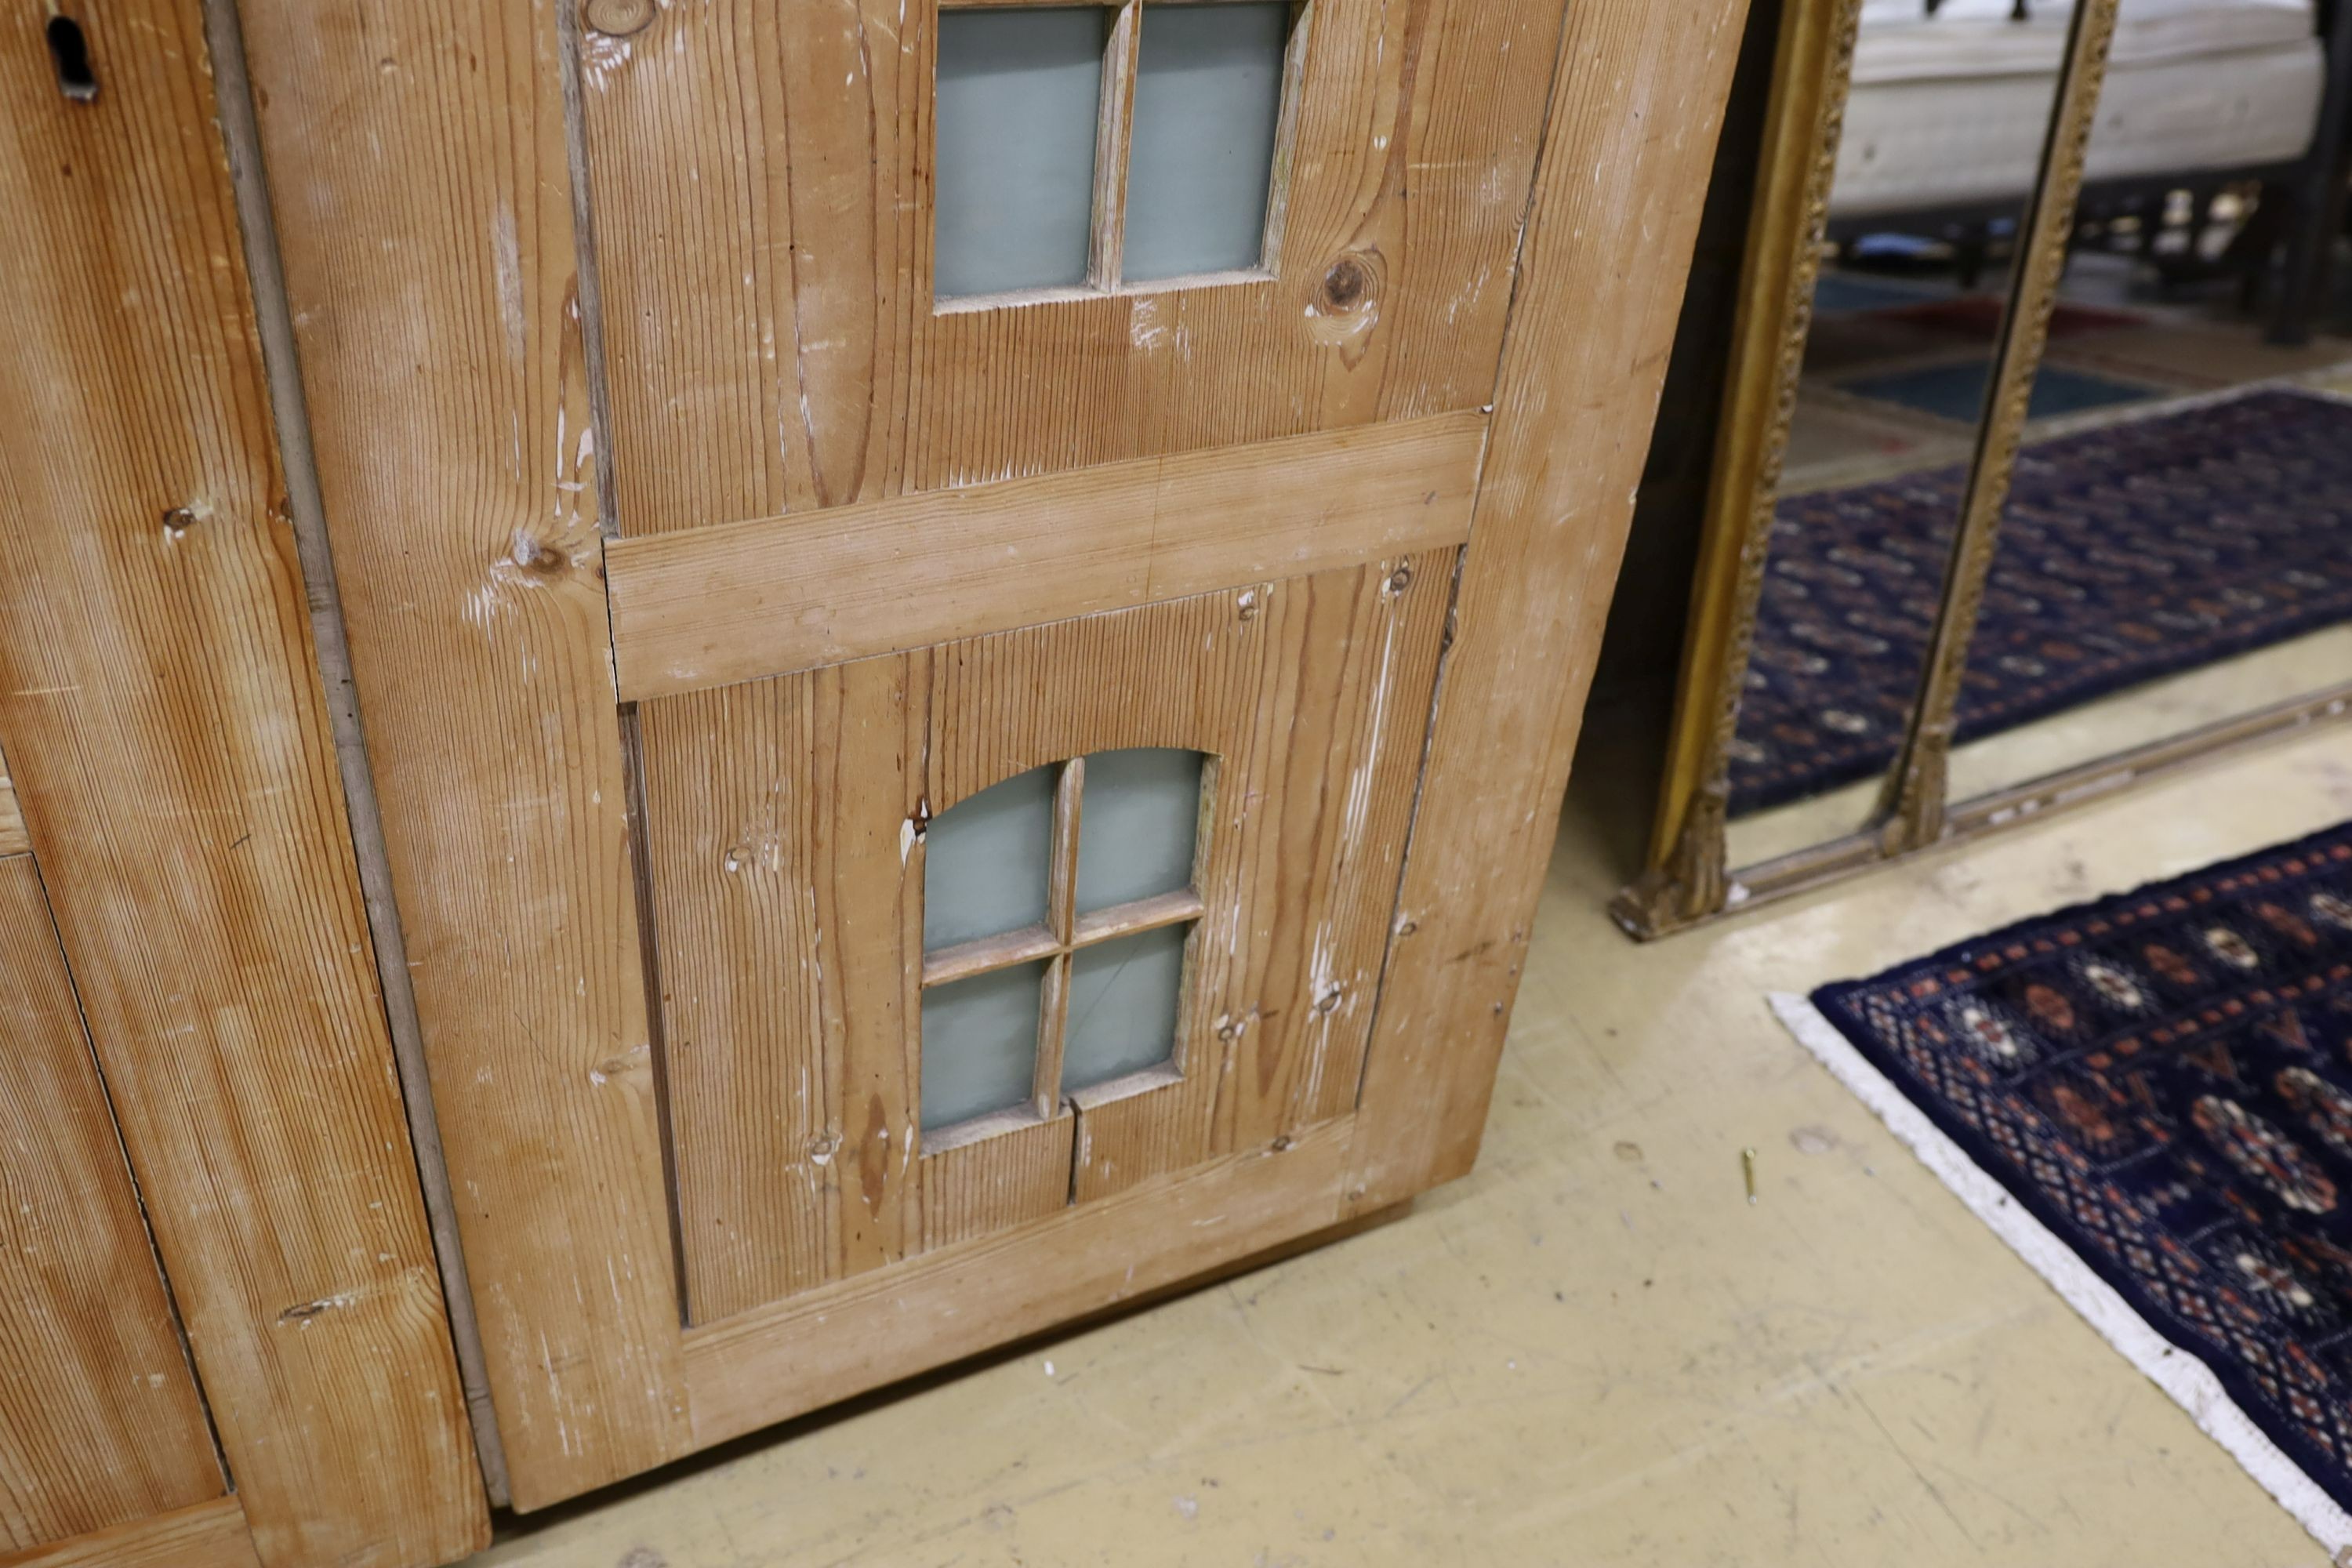 A 19th century stripped pine hall cupboard modelled as a dolls house the two door nine window facade enclosing a compartmented interior, width 182cm, depth 46cm, height 192cm